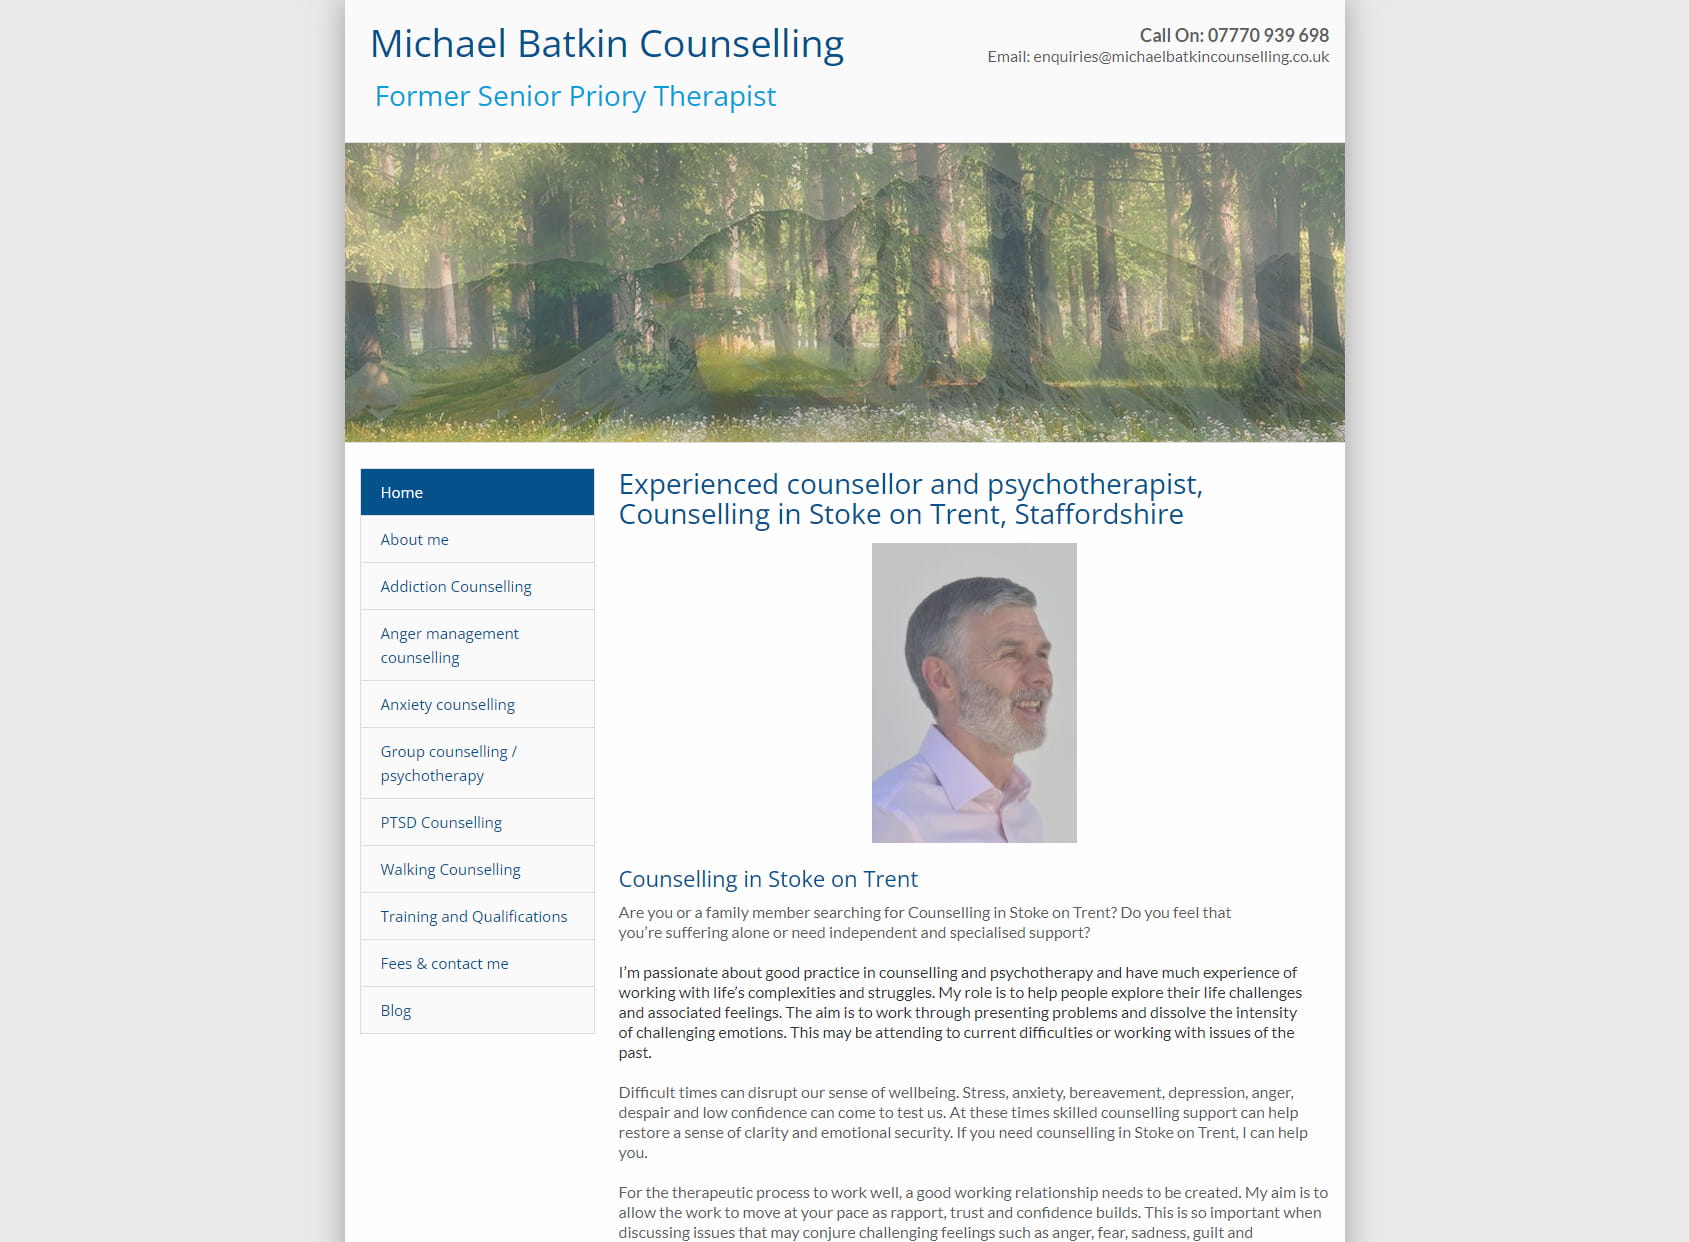 Michael Batkin Counselling in Stoke on Trent